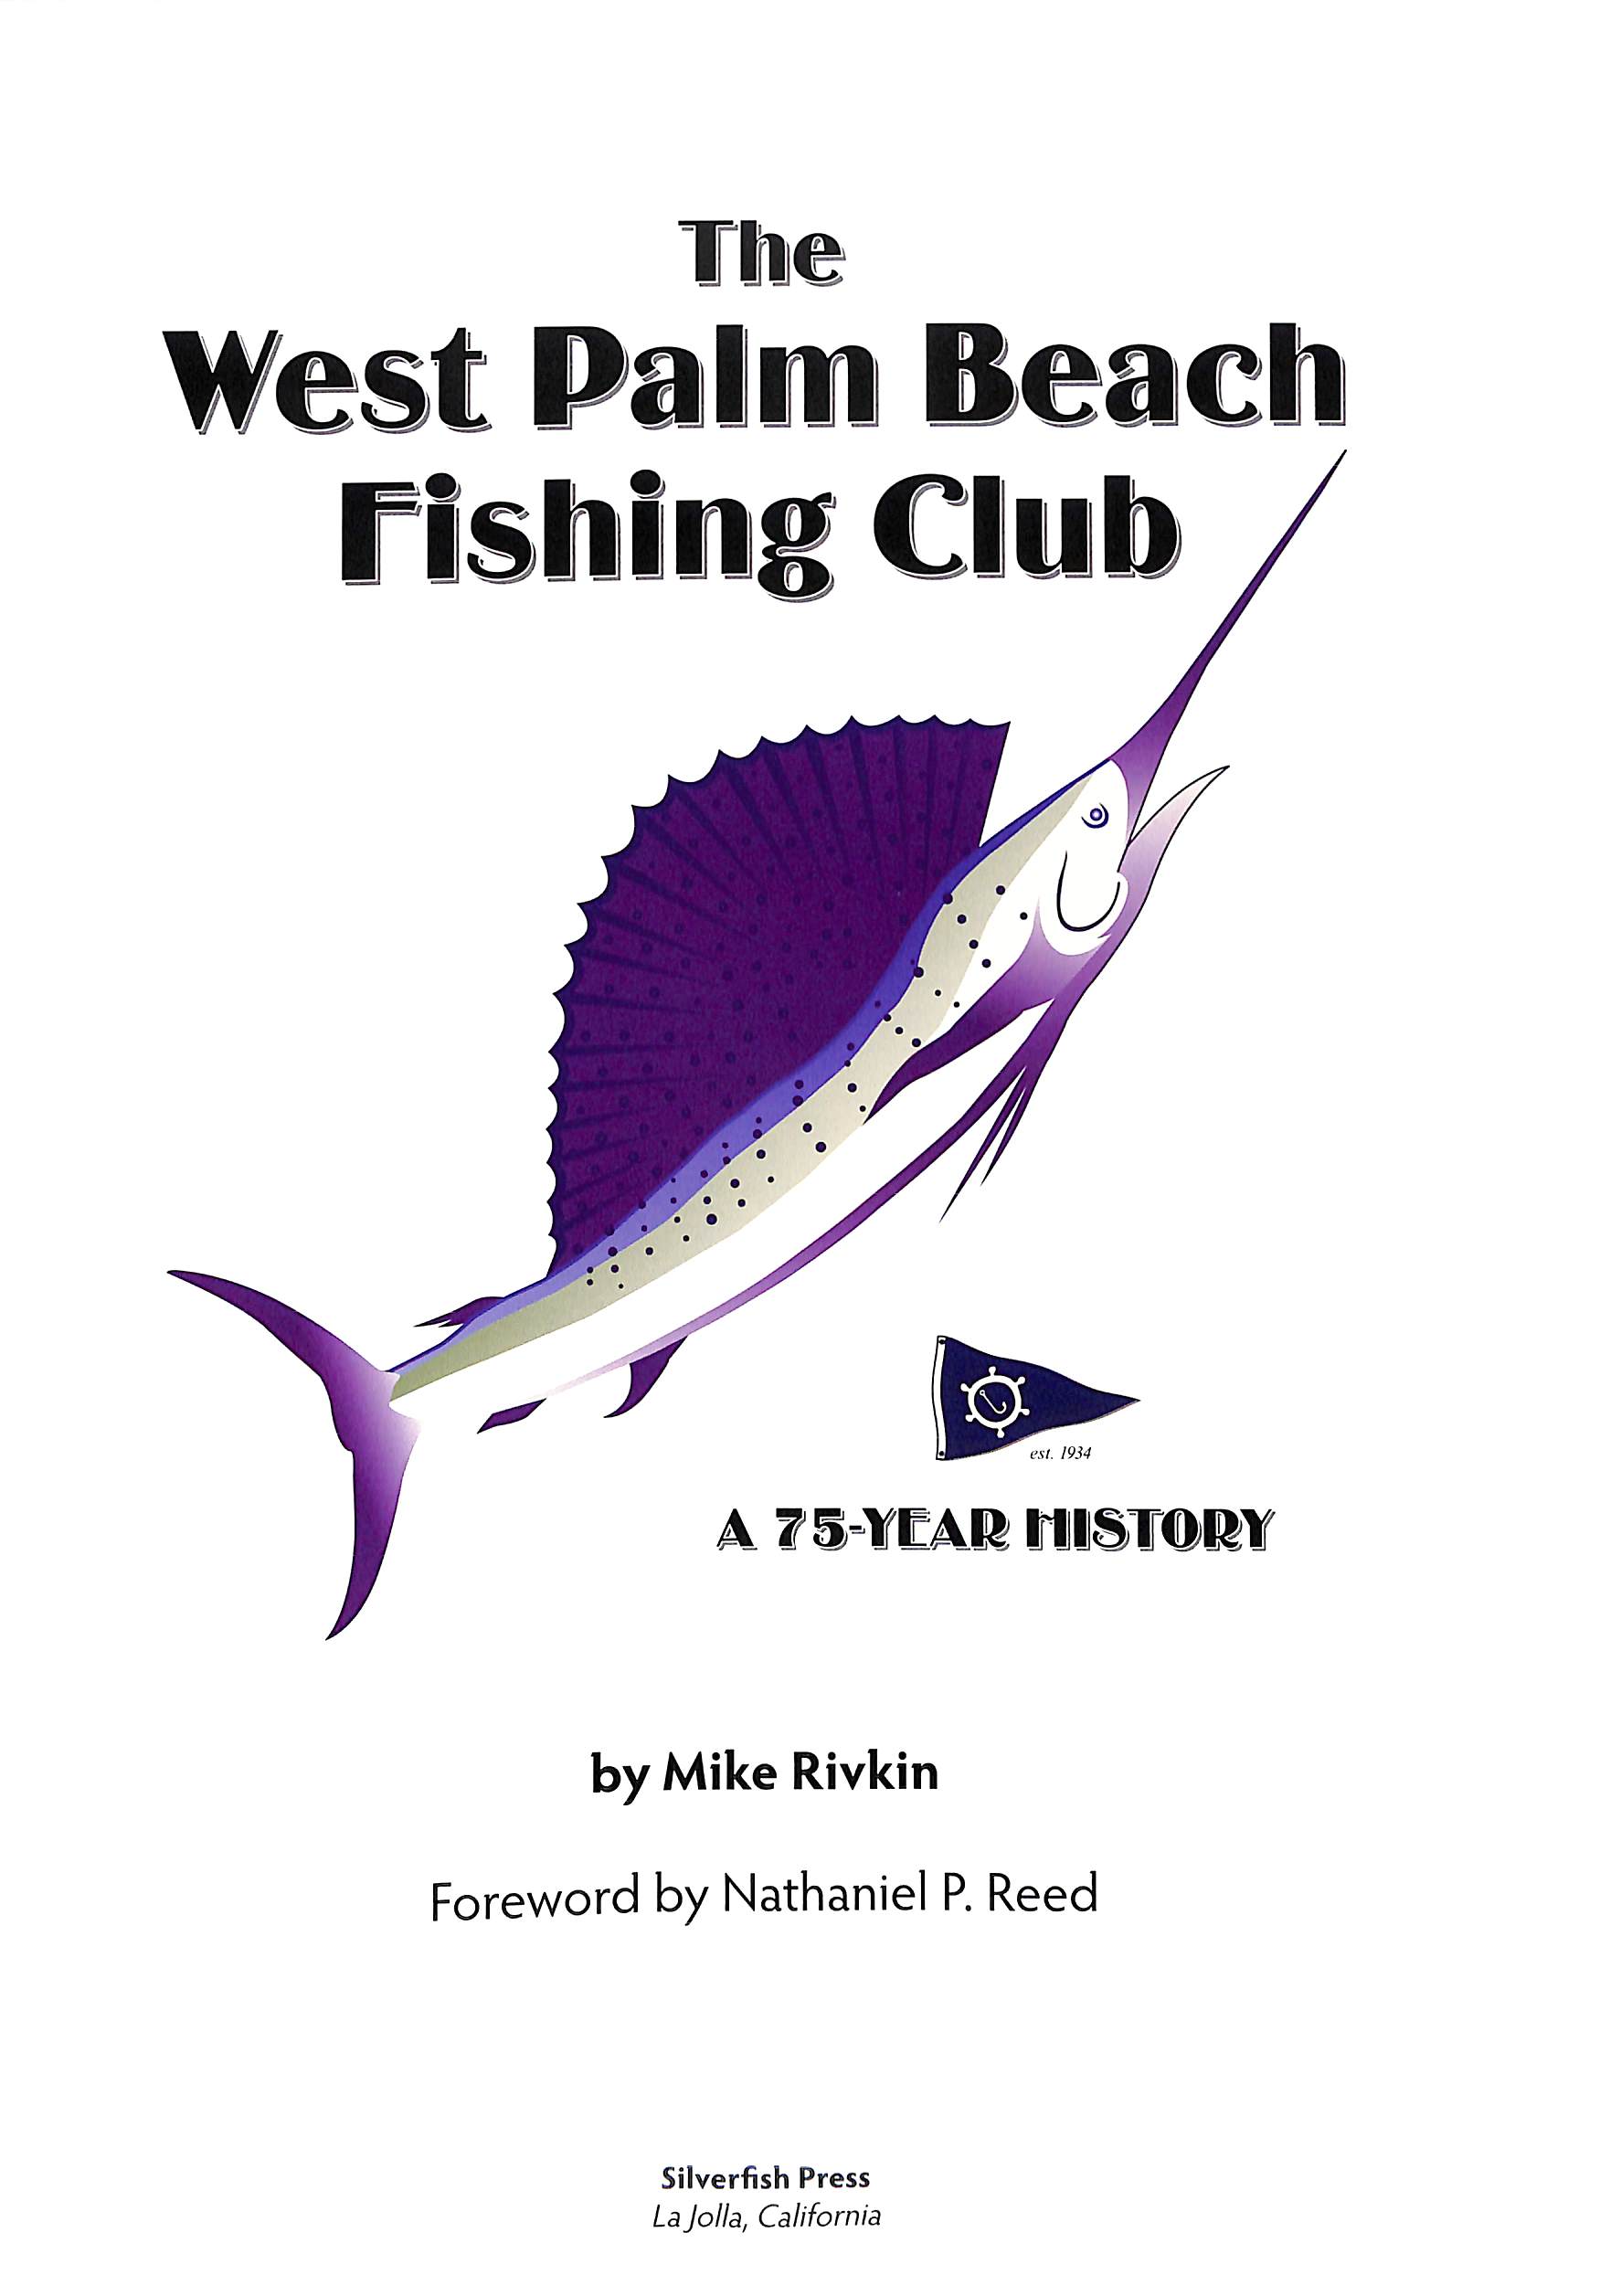 The West Palm Beach Fishing Club by Mike Rivkin | The Cary Collection